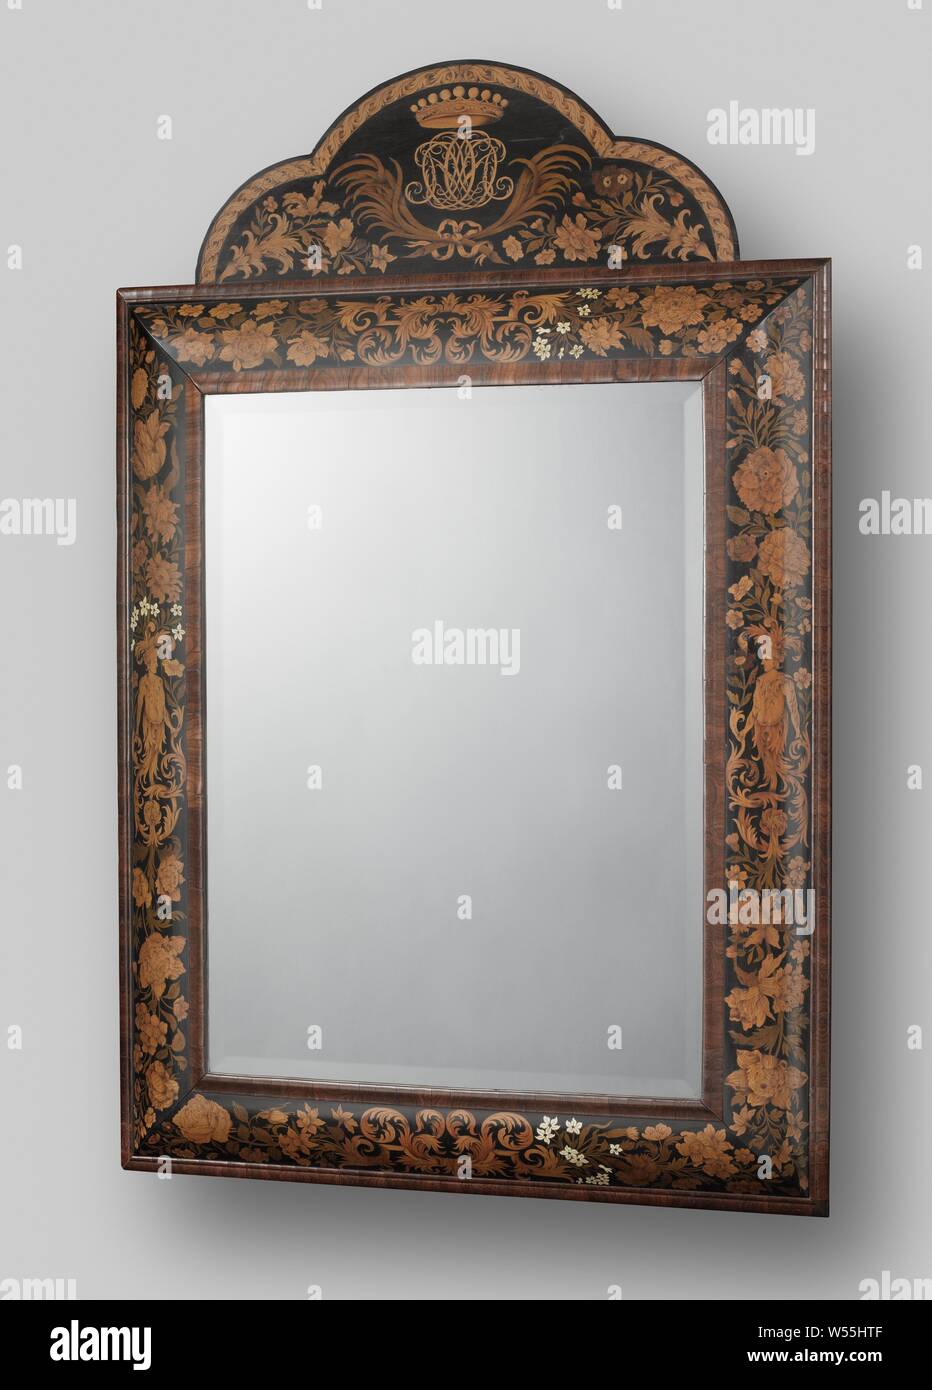 Two mirror frames Mirror frame decorated with marquetry and with a